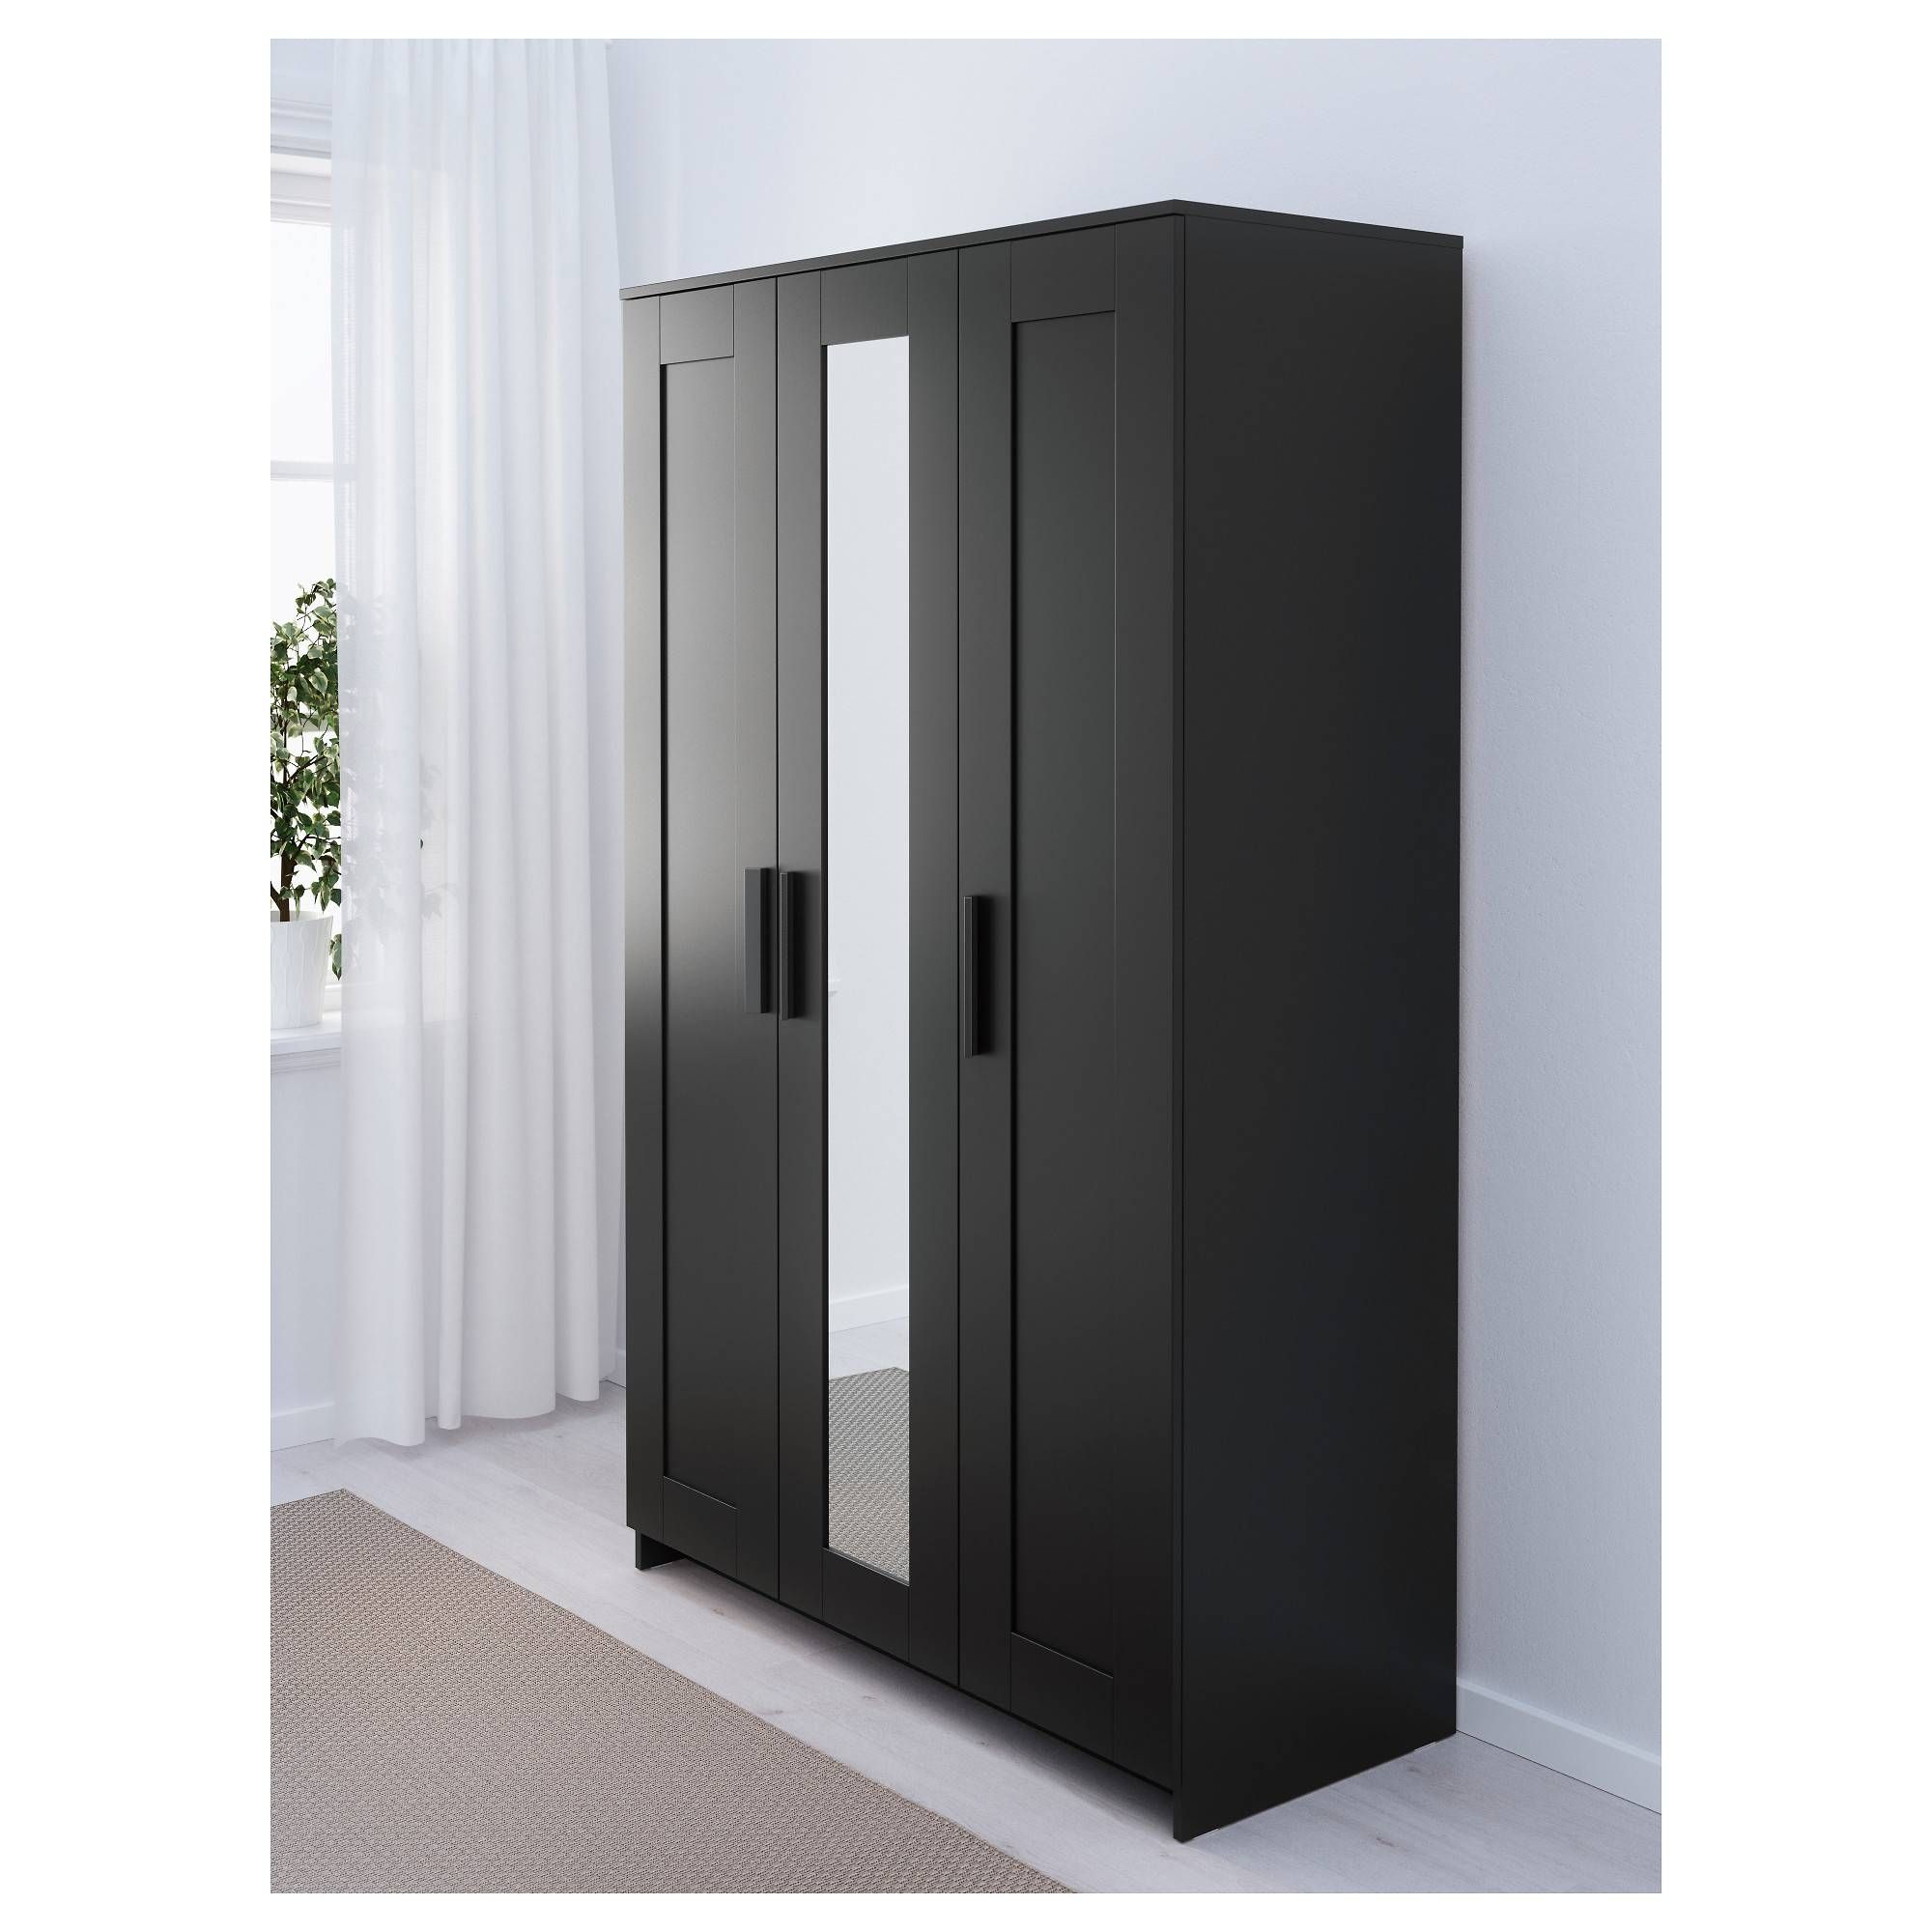 Brimnes Wardrobe With 3 Doors – White – Ikea Intended For Three Door Mirrored Wardrobes (View 5 of 15)